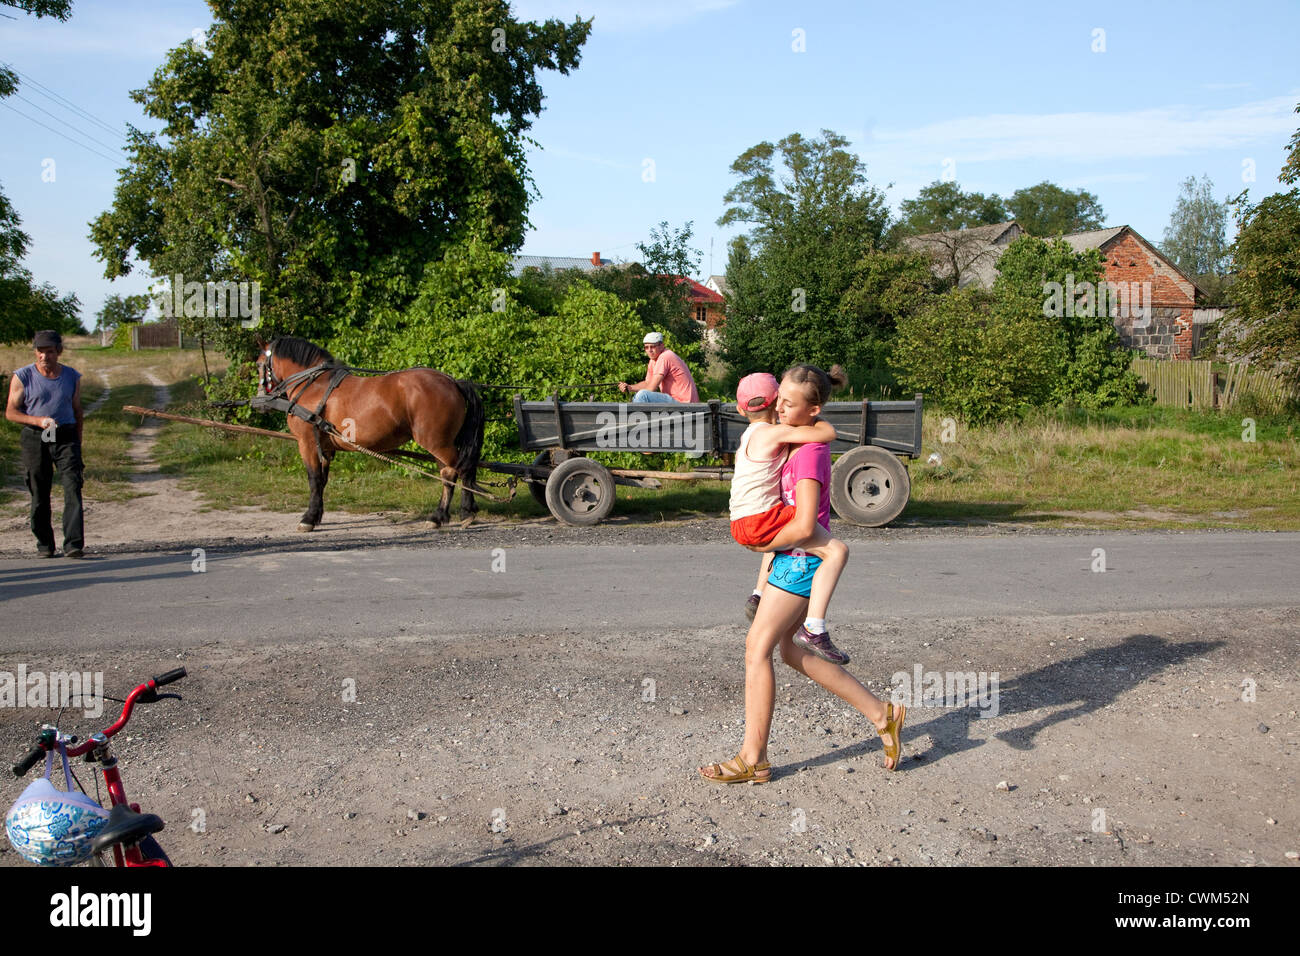 Teen girl carrying her brother along village street against a rural background of a horse drawn wagon. Mala Wola Central Poland Stock Photo